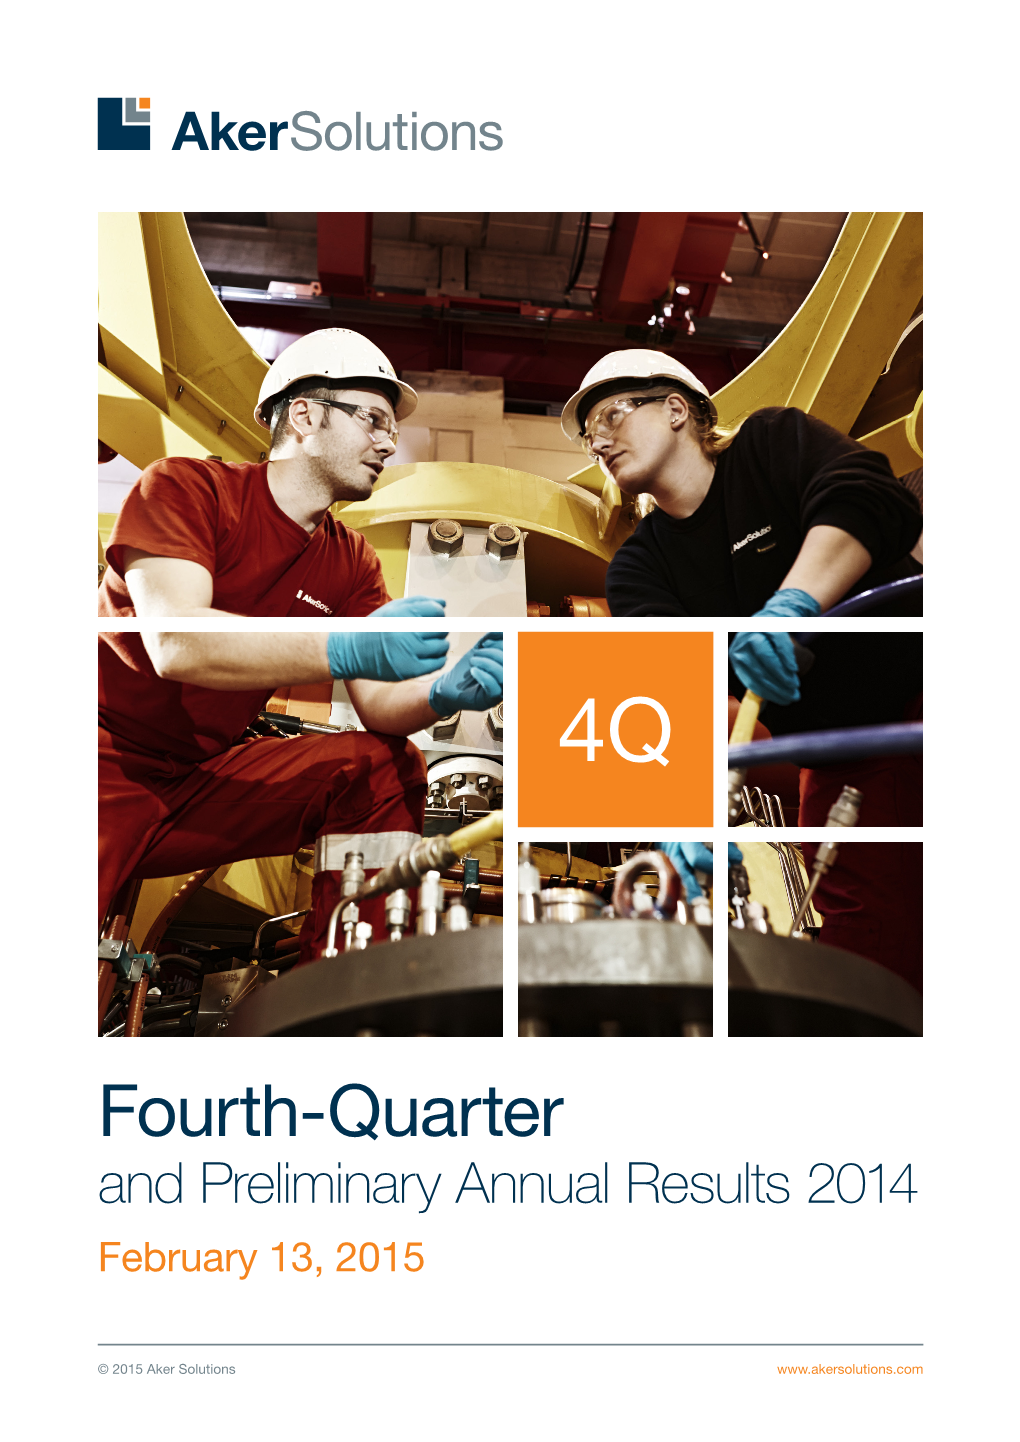 Fourth-Quarter and Preliminary Annual Results 2014 February 13, 2015